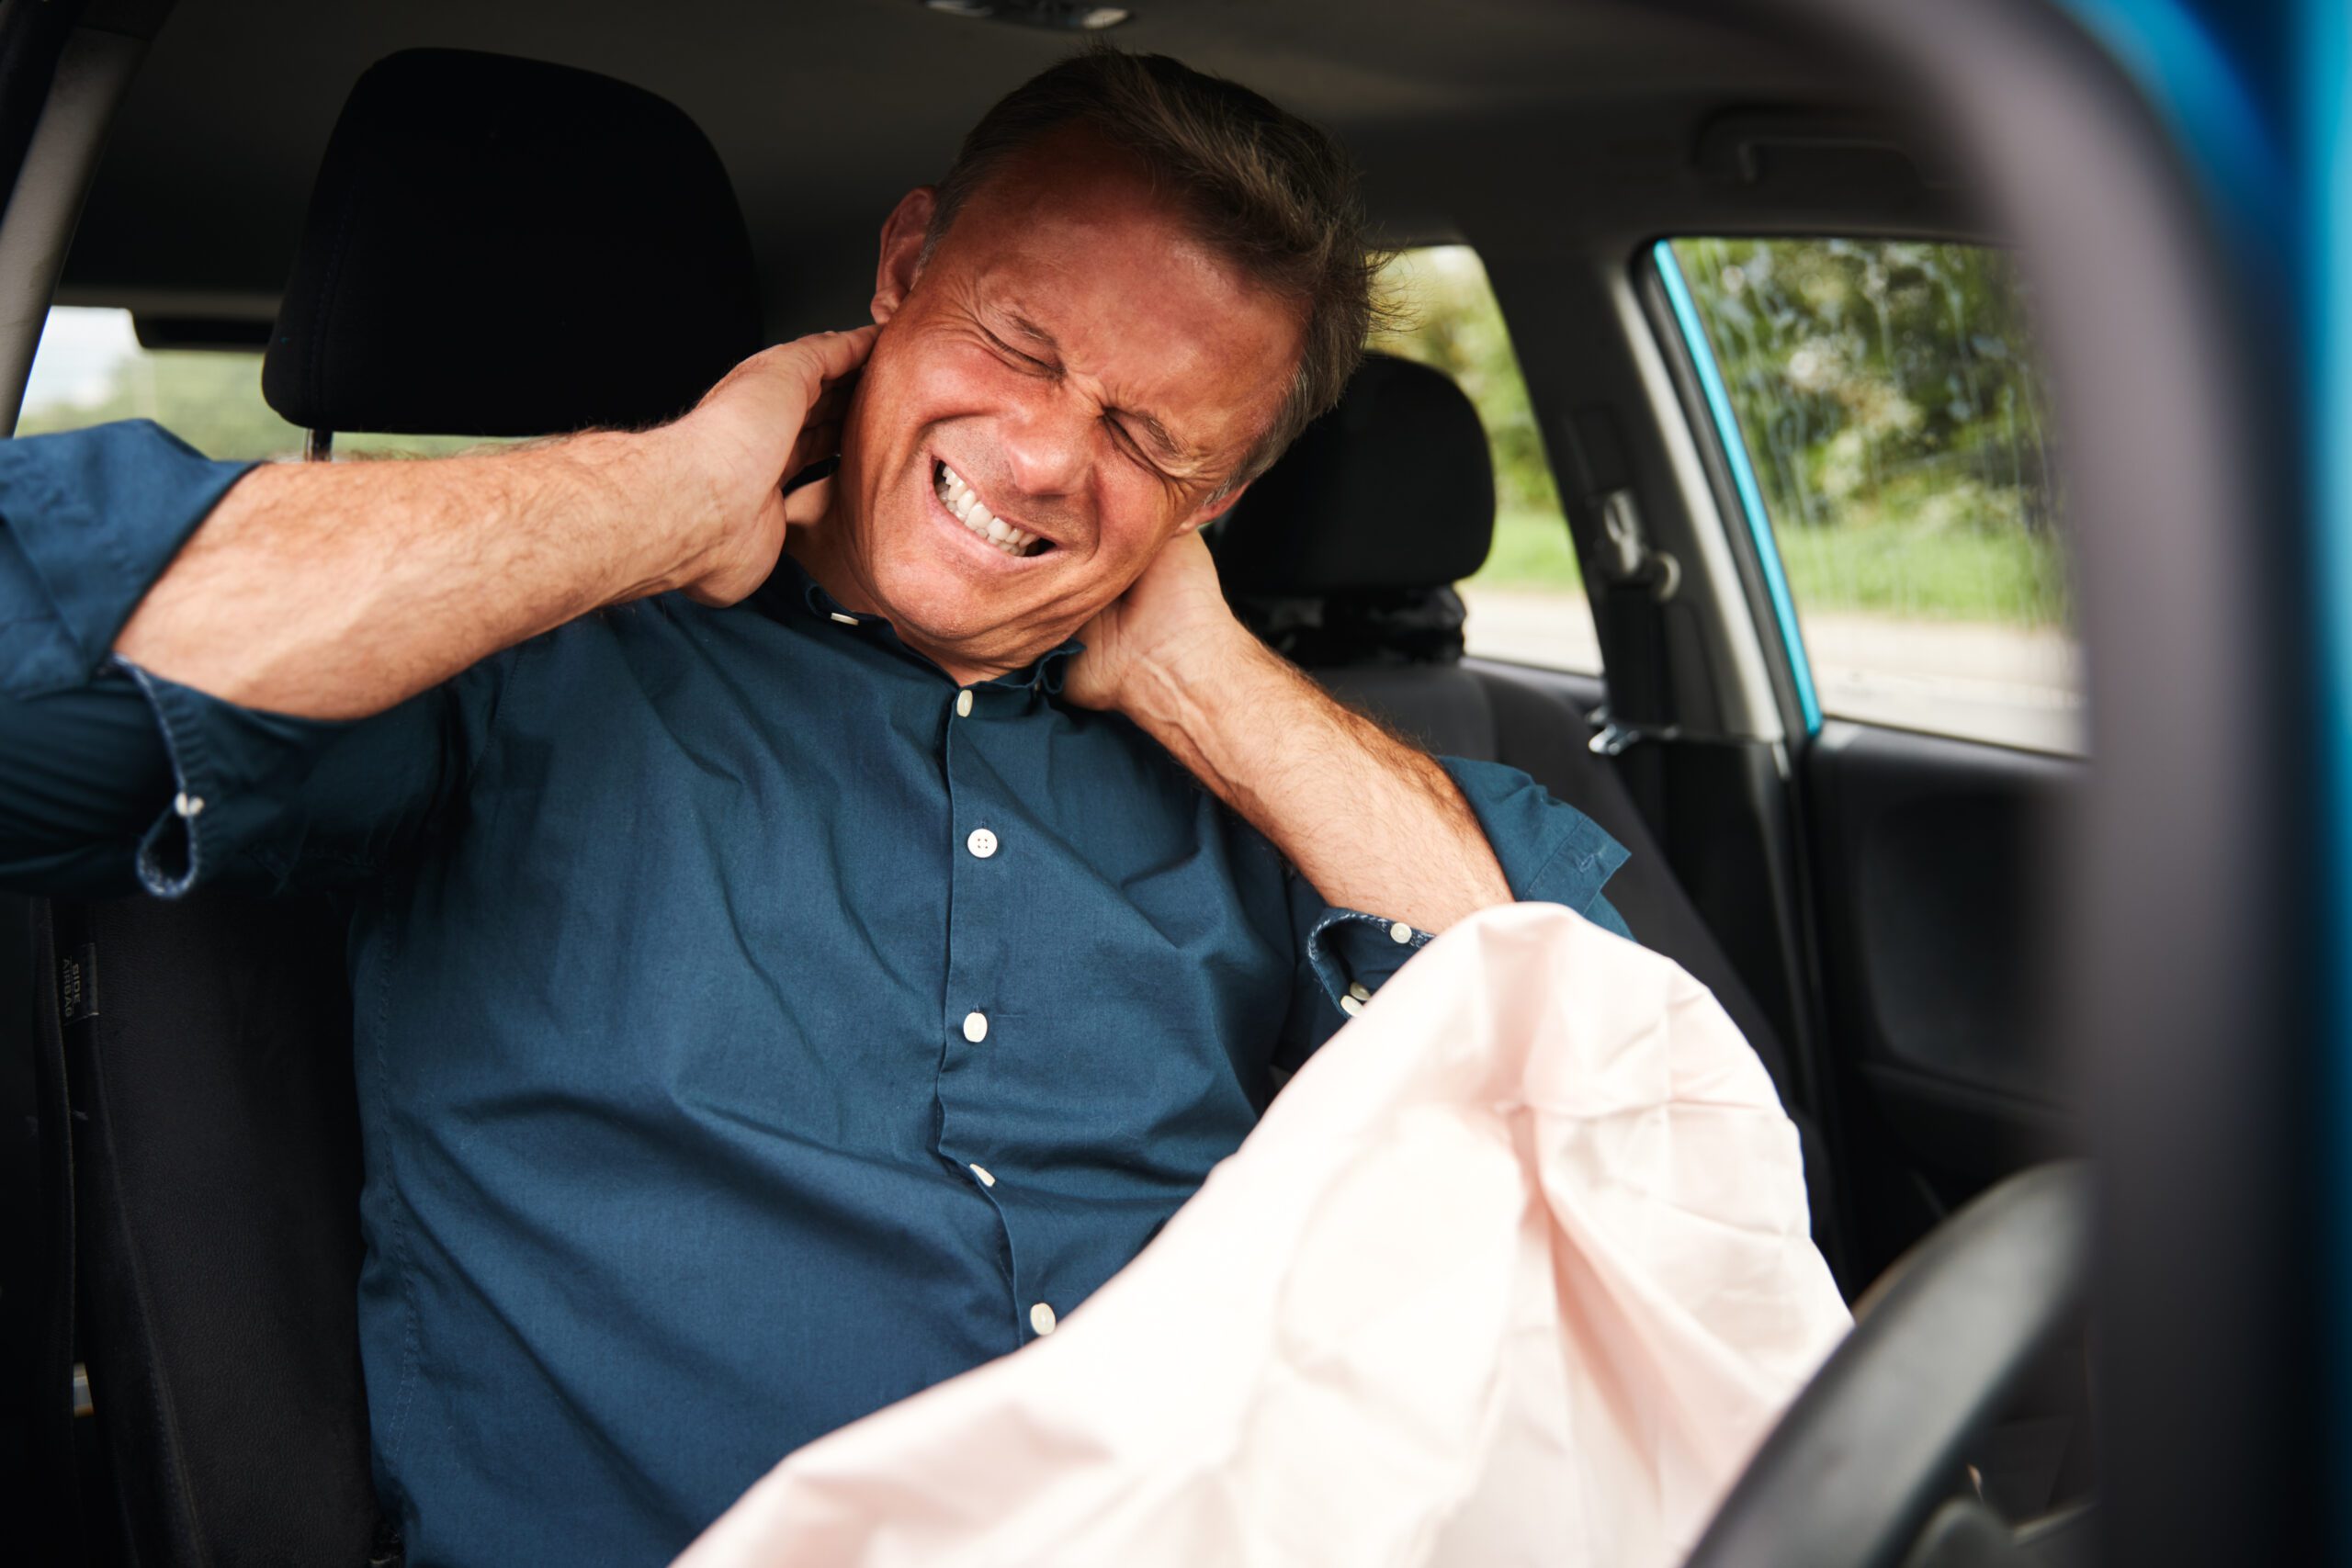 A man sitting in a car, touching his neck with both hands and looking to be in great pain.